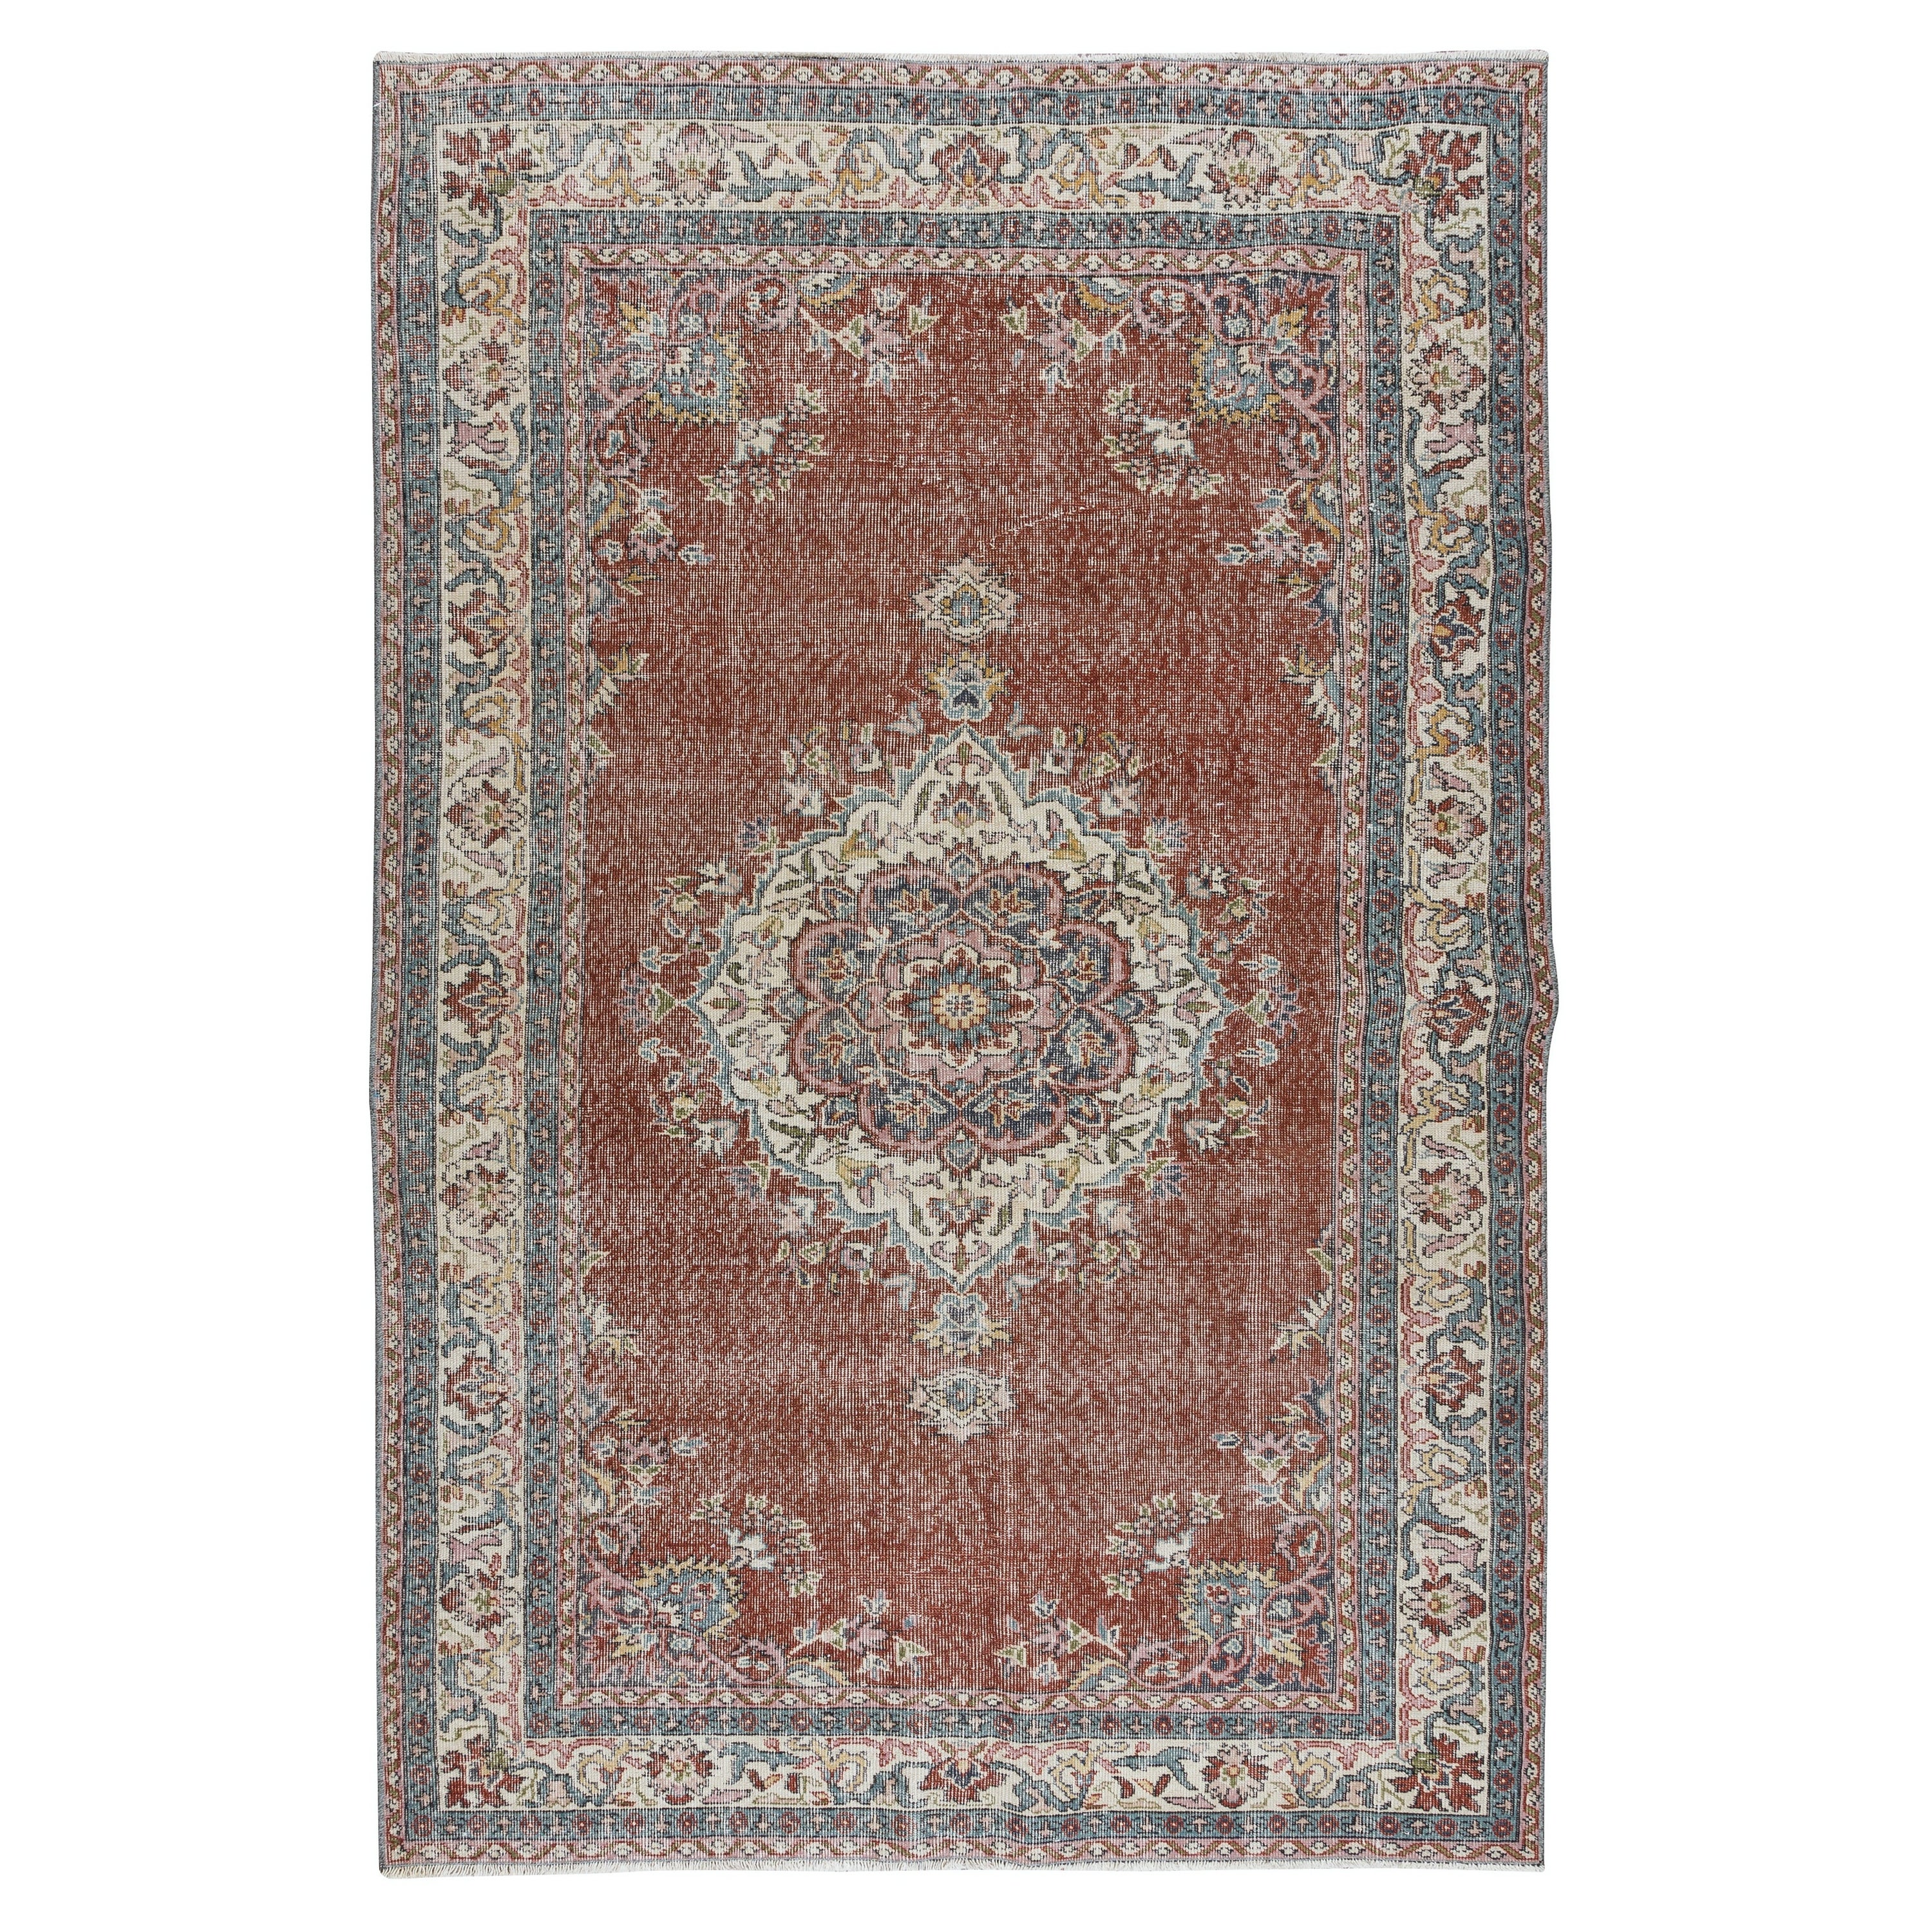 5.4x8.5 Ft Traditionnel Vintage Hand Knotted Turkish Rug with Medallion Design